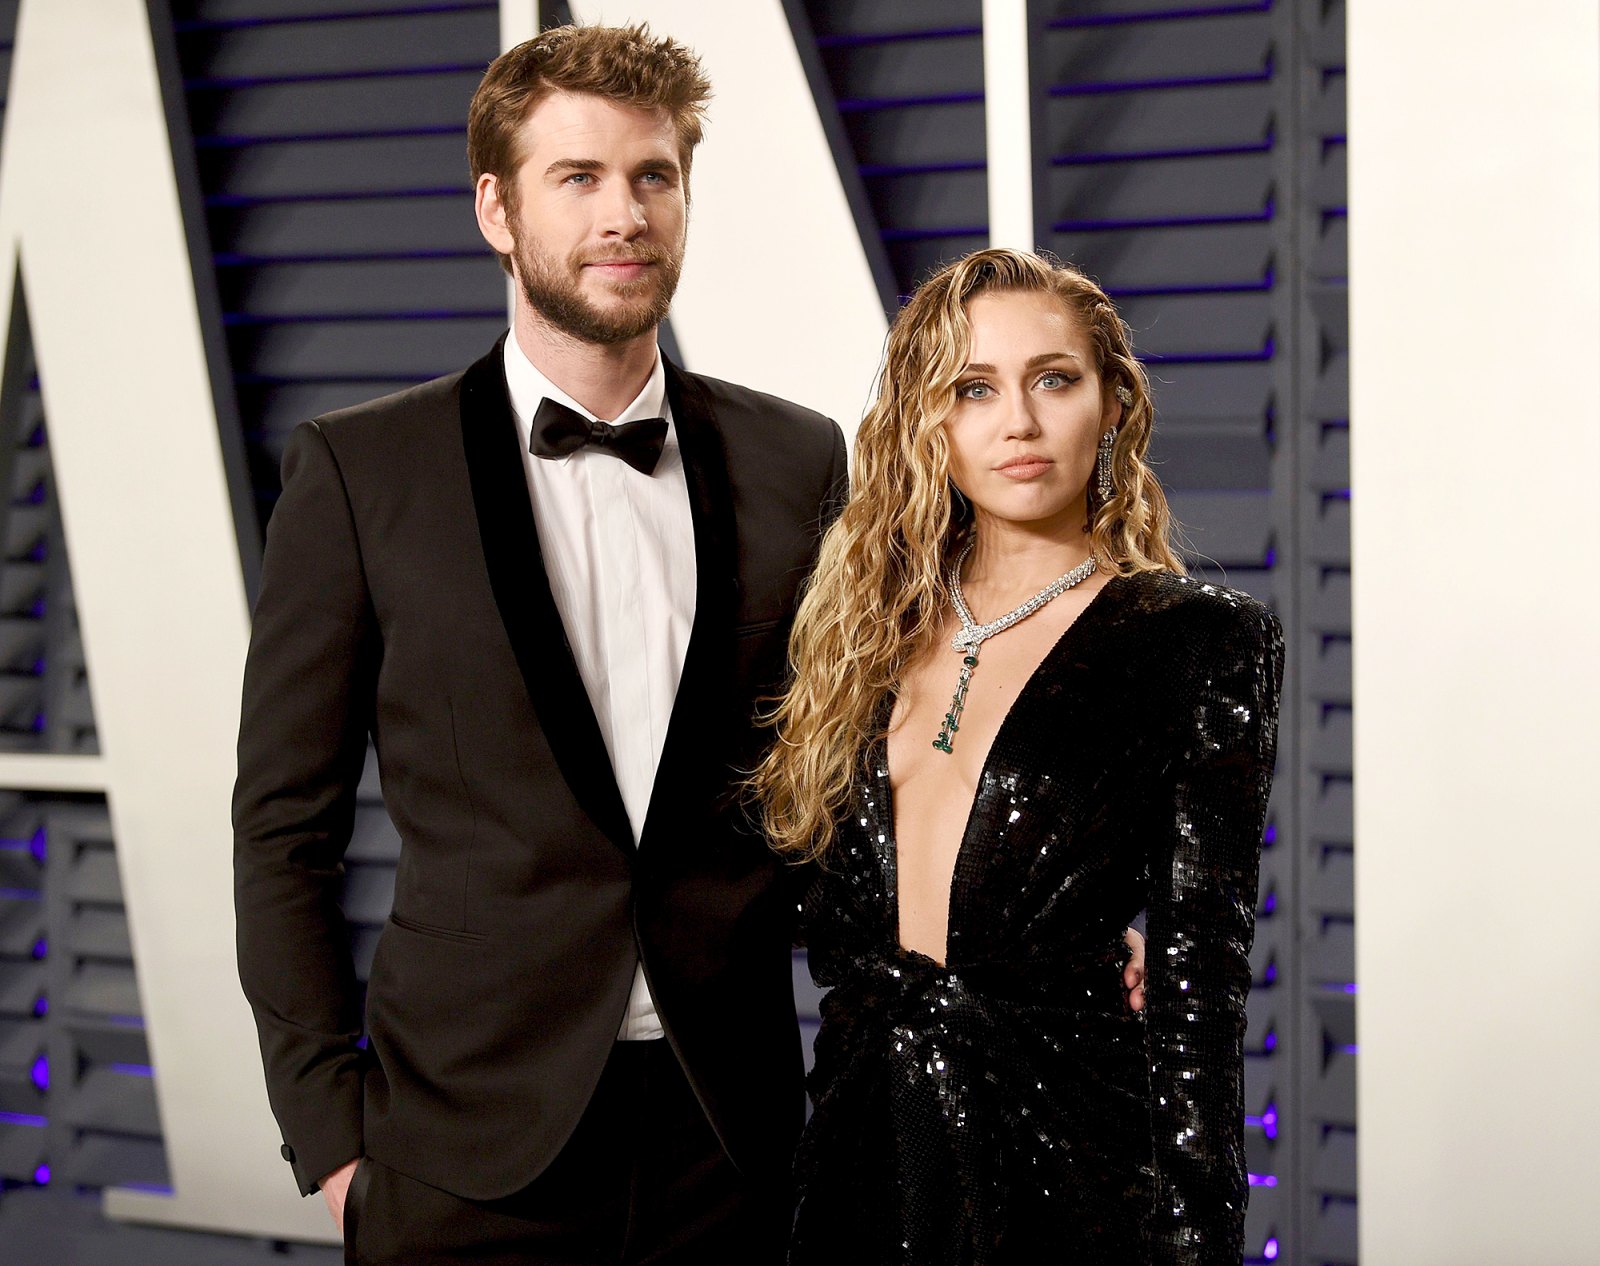 Why Liam Hemsworth 'Quickly' Filed for Divorce From Miley Cyrus